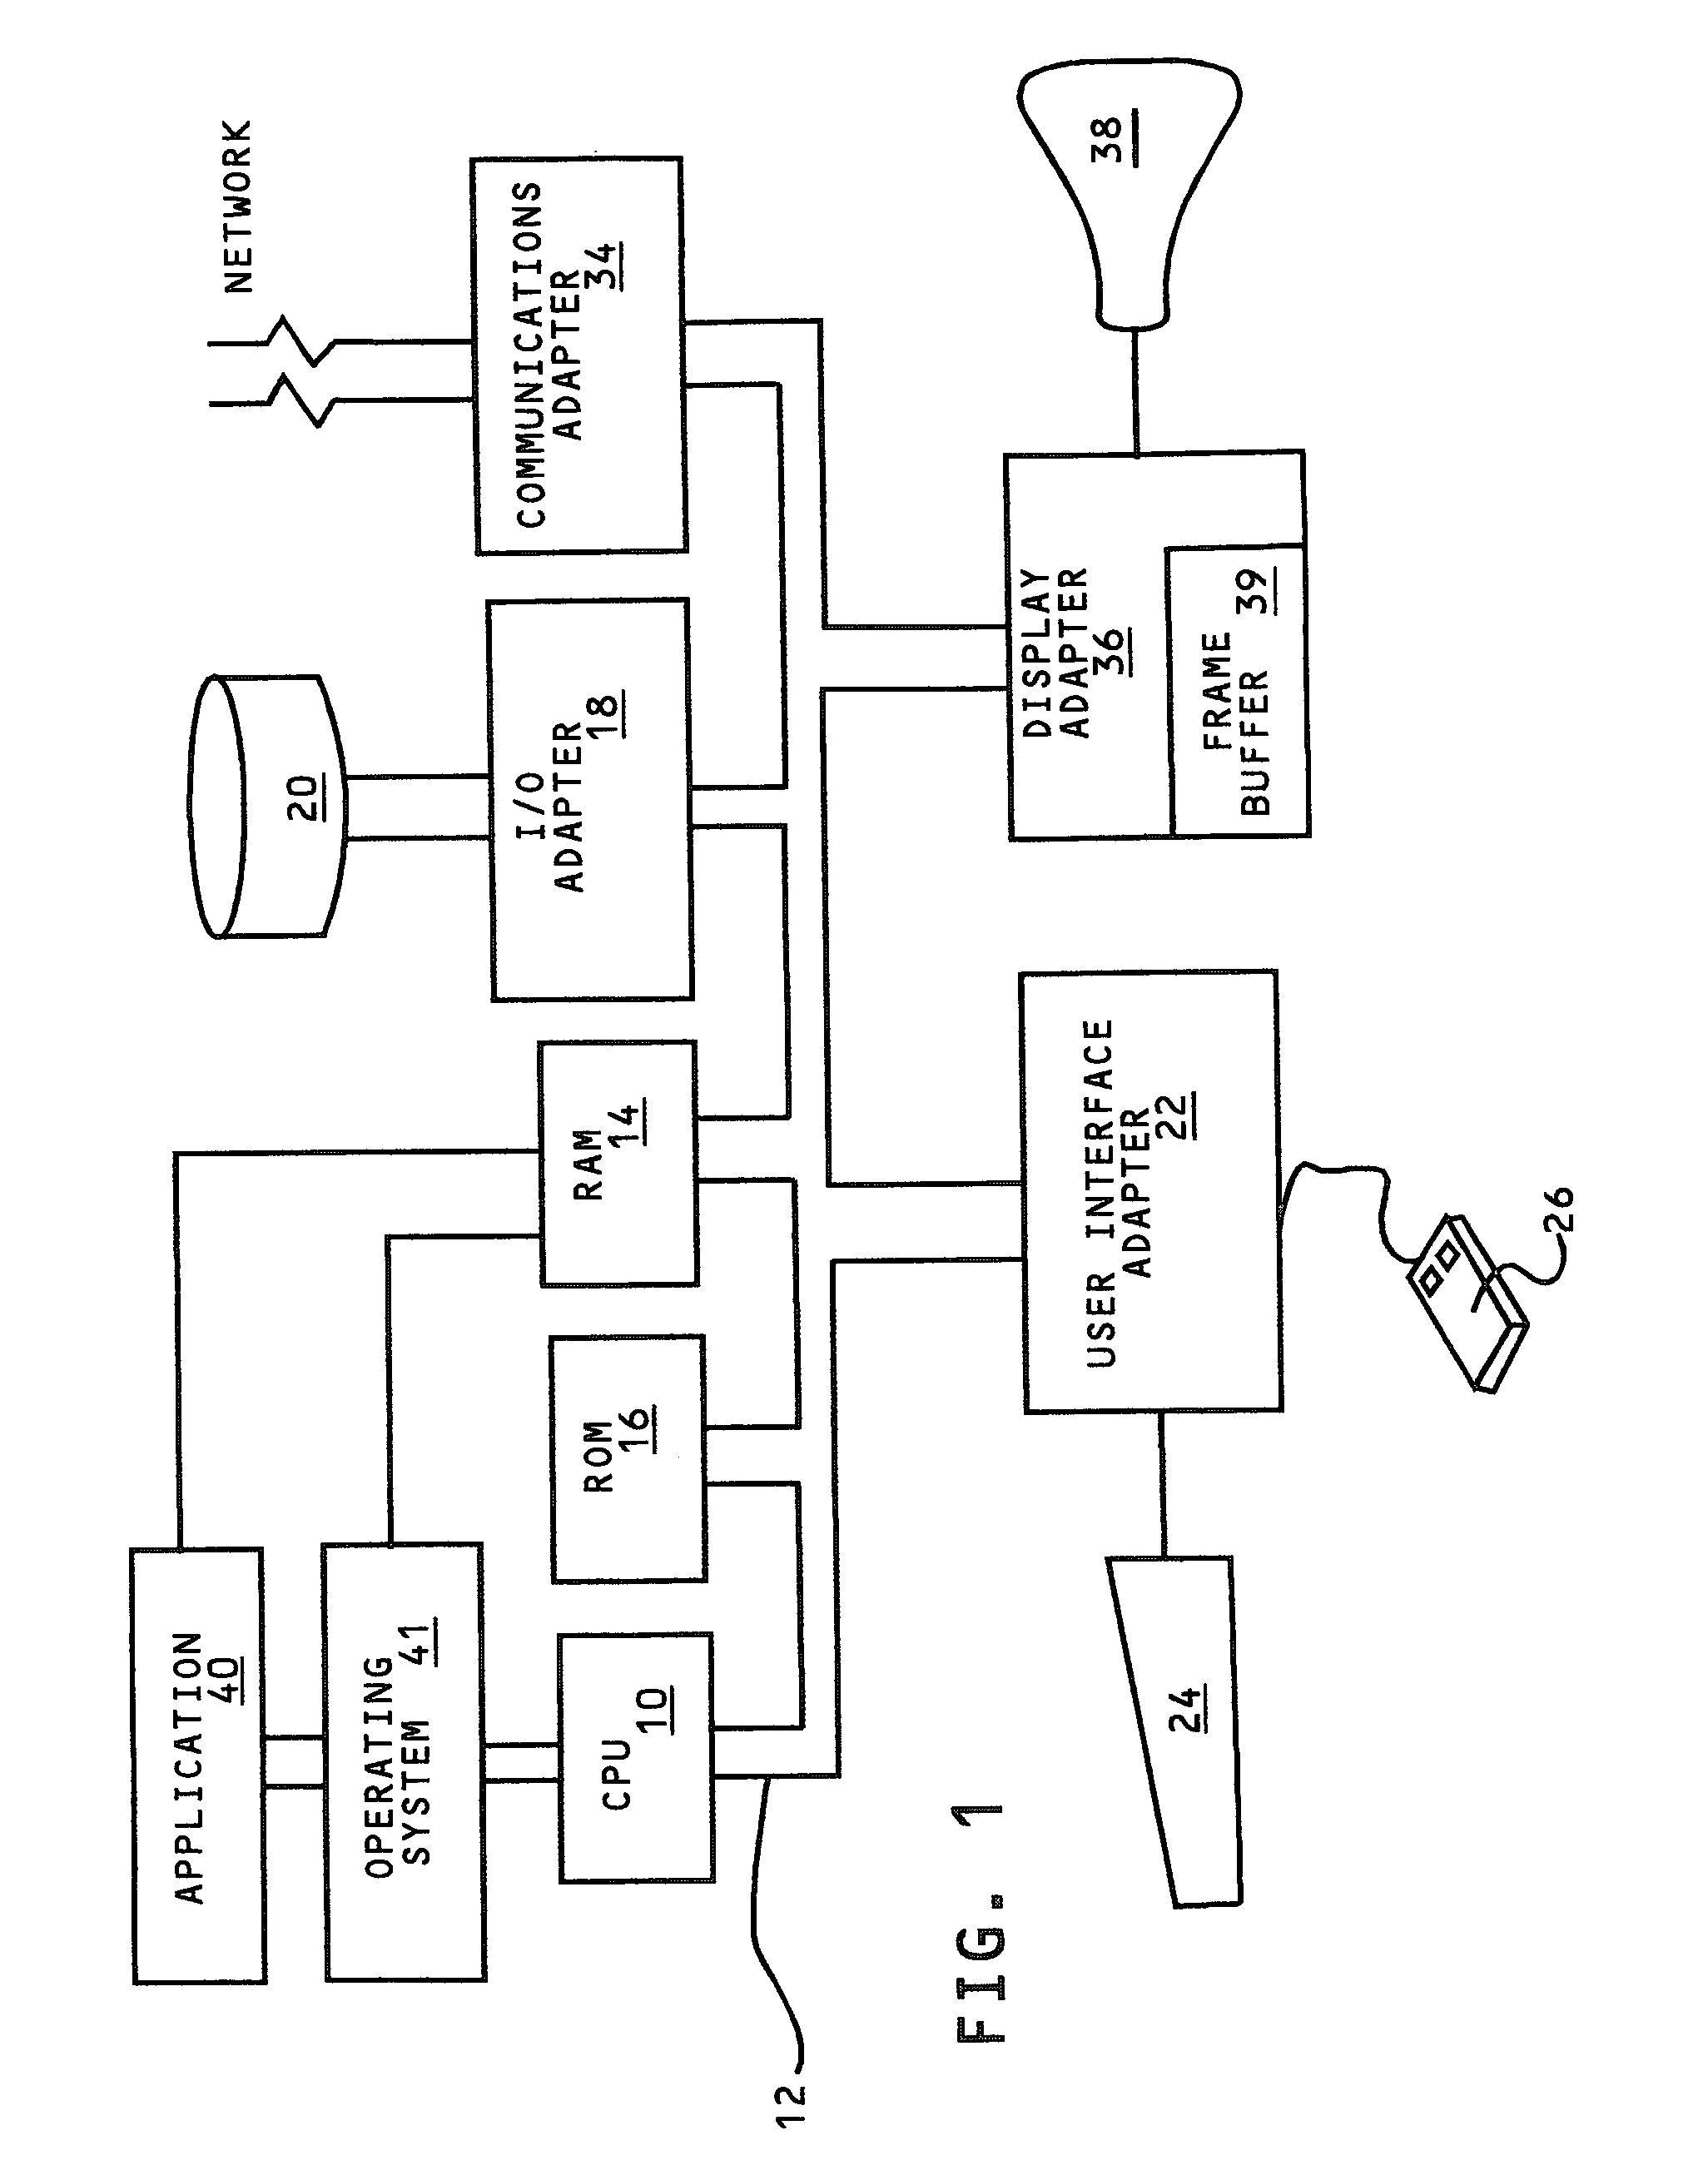 Changing the operating system in a computer operation without substantial interruption of operations through the use of a surrogate computer